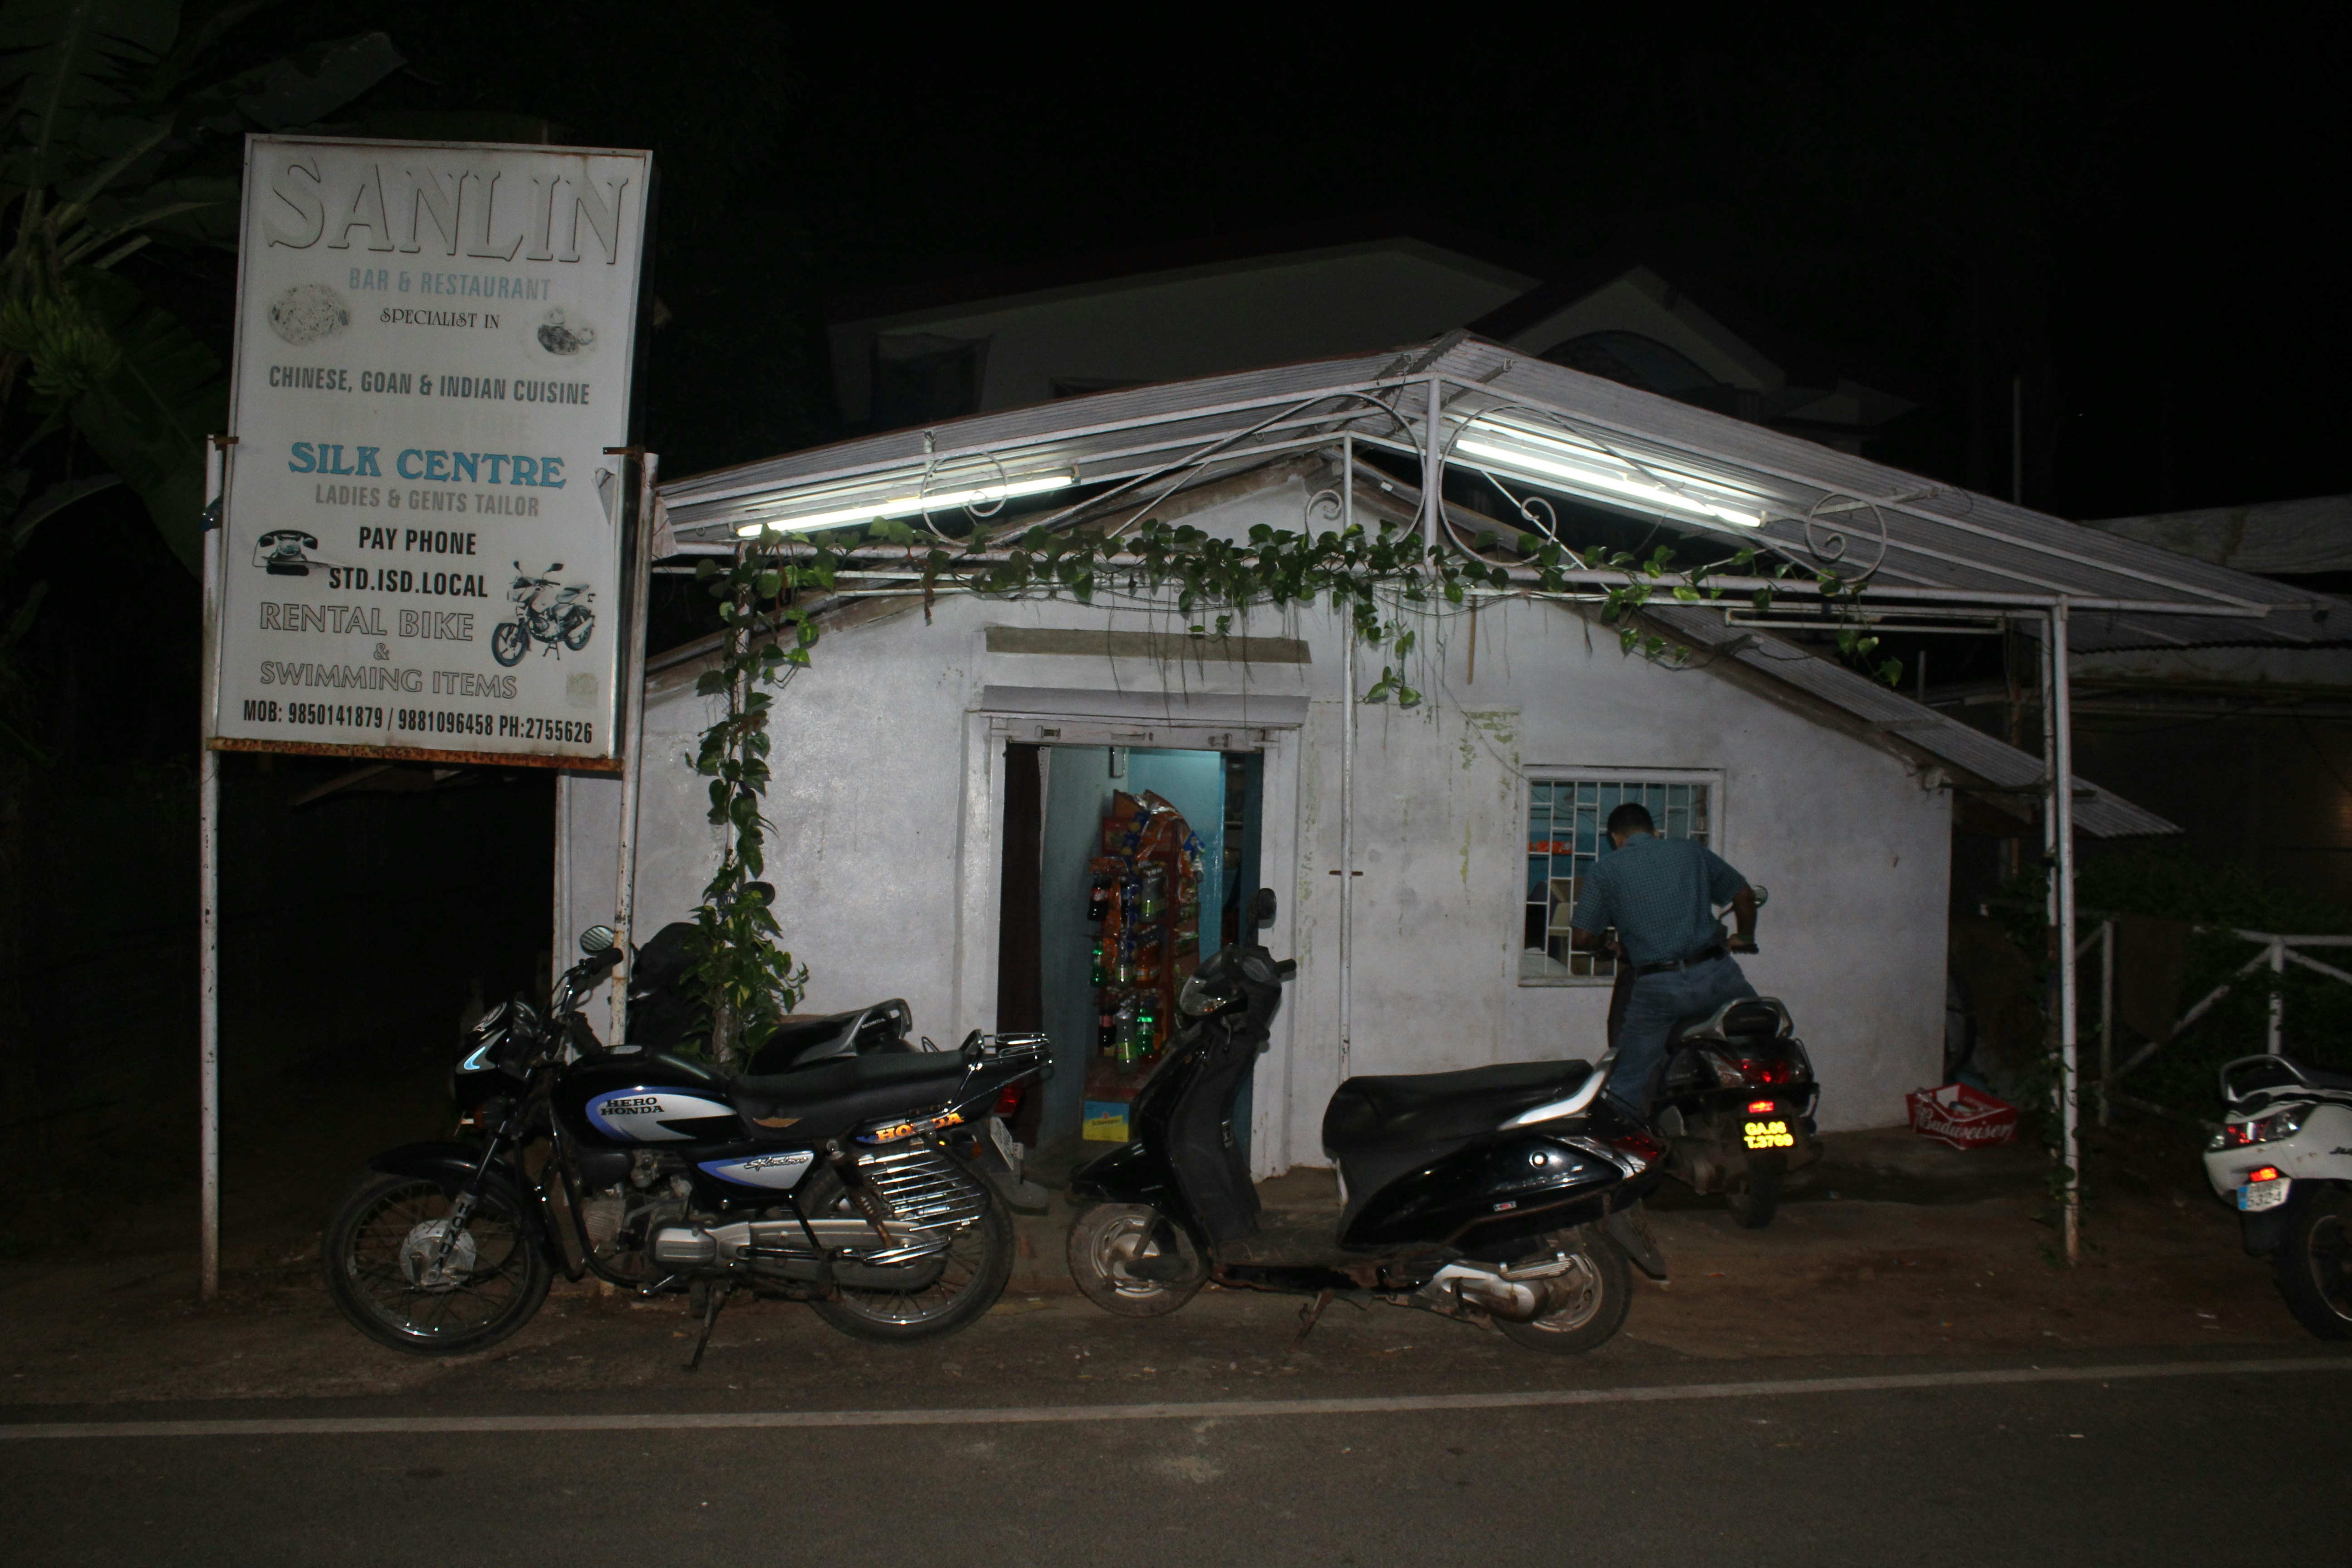 The dark exterior of Sanlin Tavern is a simple white concrete building with mopeds parked out front